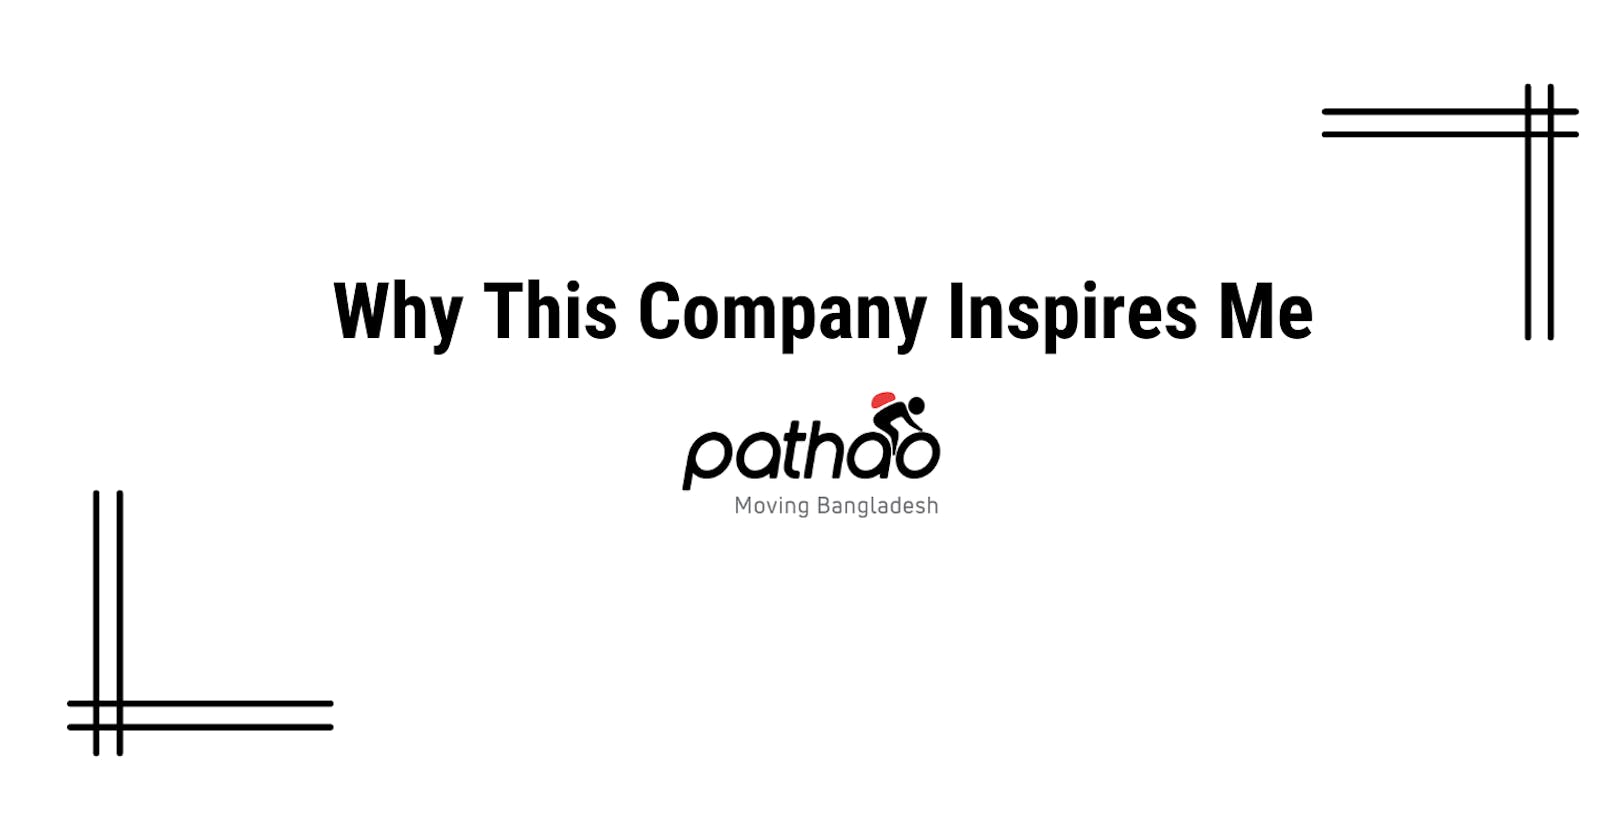 Why This Company Inspires Me